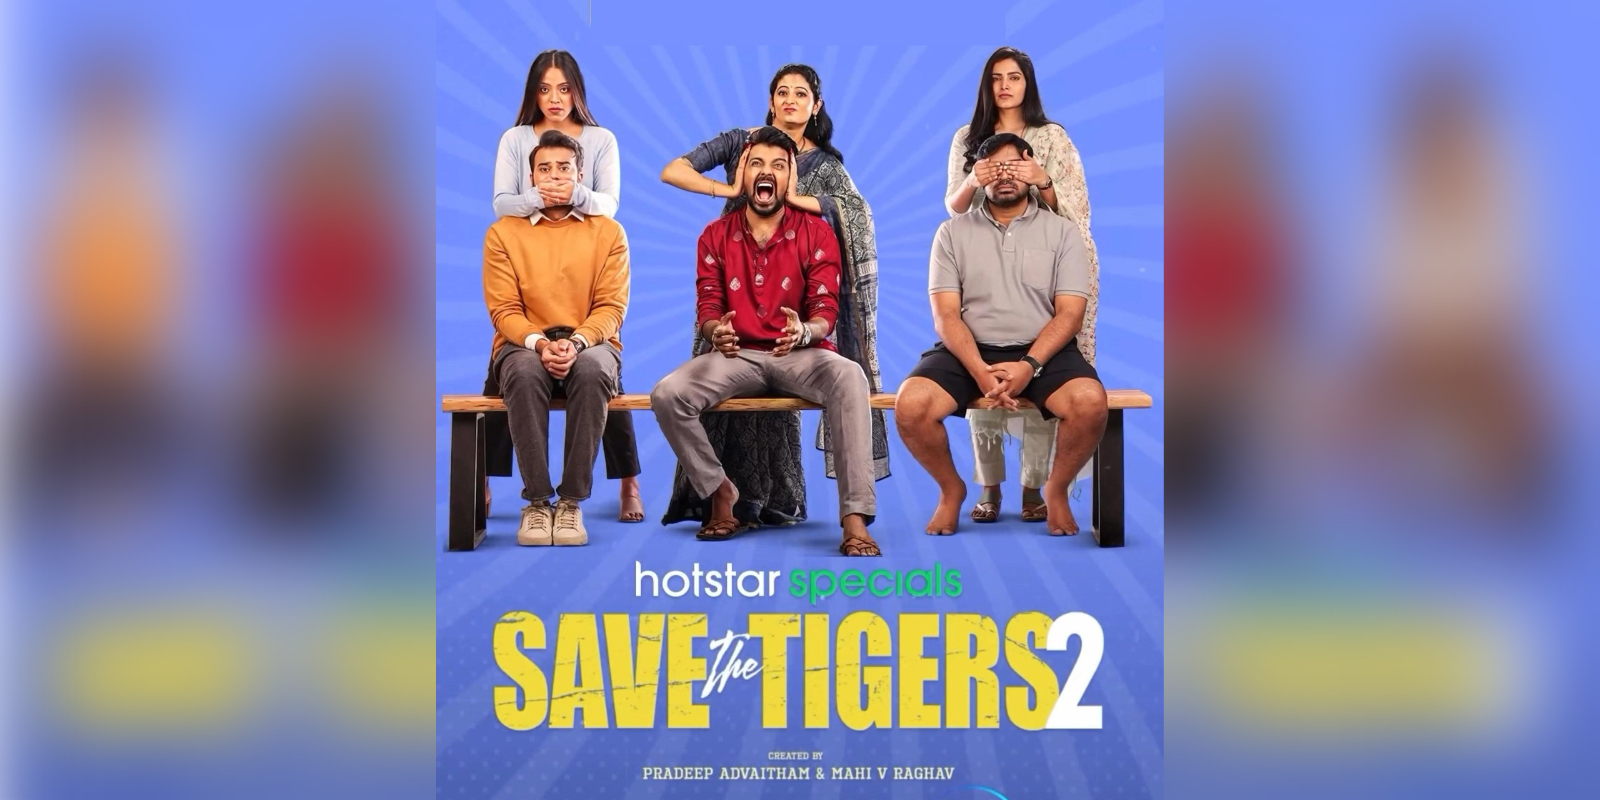 Director Arun Kothapally's web series Save the Tigers 2 is a sequel to Save the Tigers